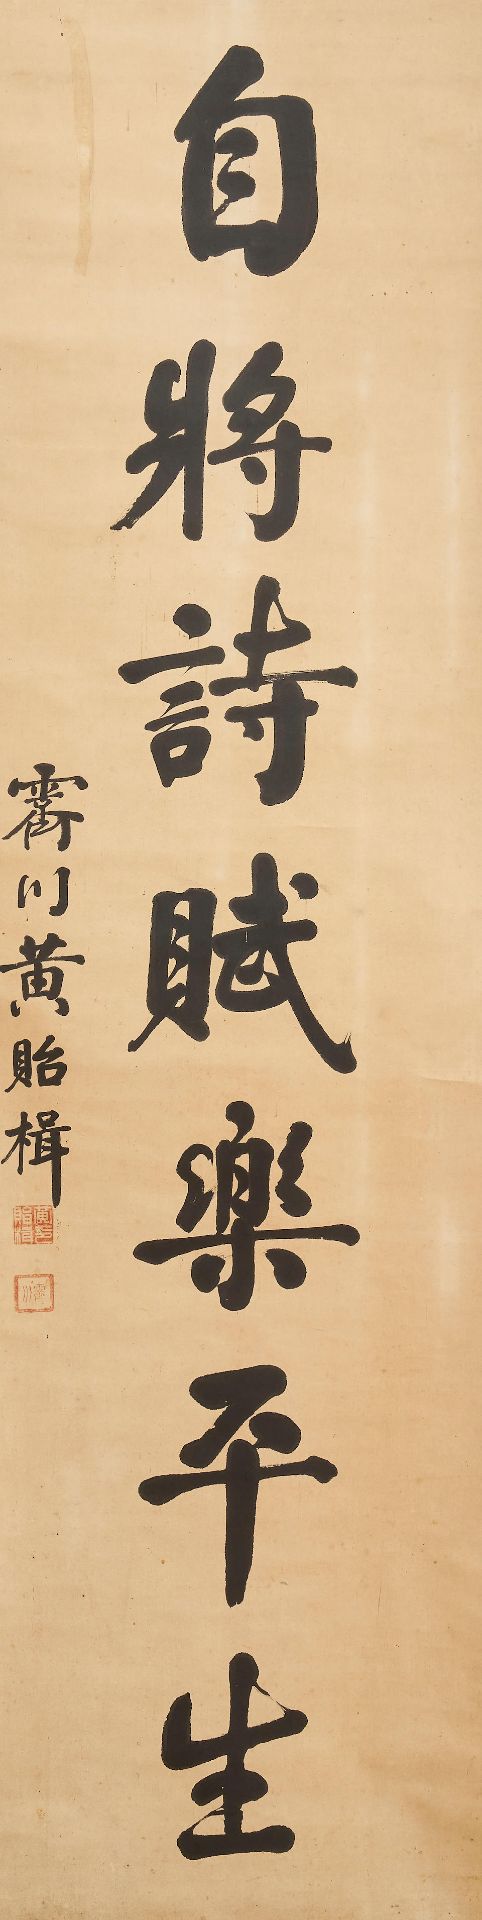 Huang Yiji (1850-1900) Calligraphy Couplet in Running Style (2) - Image 3 of 3